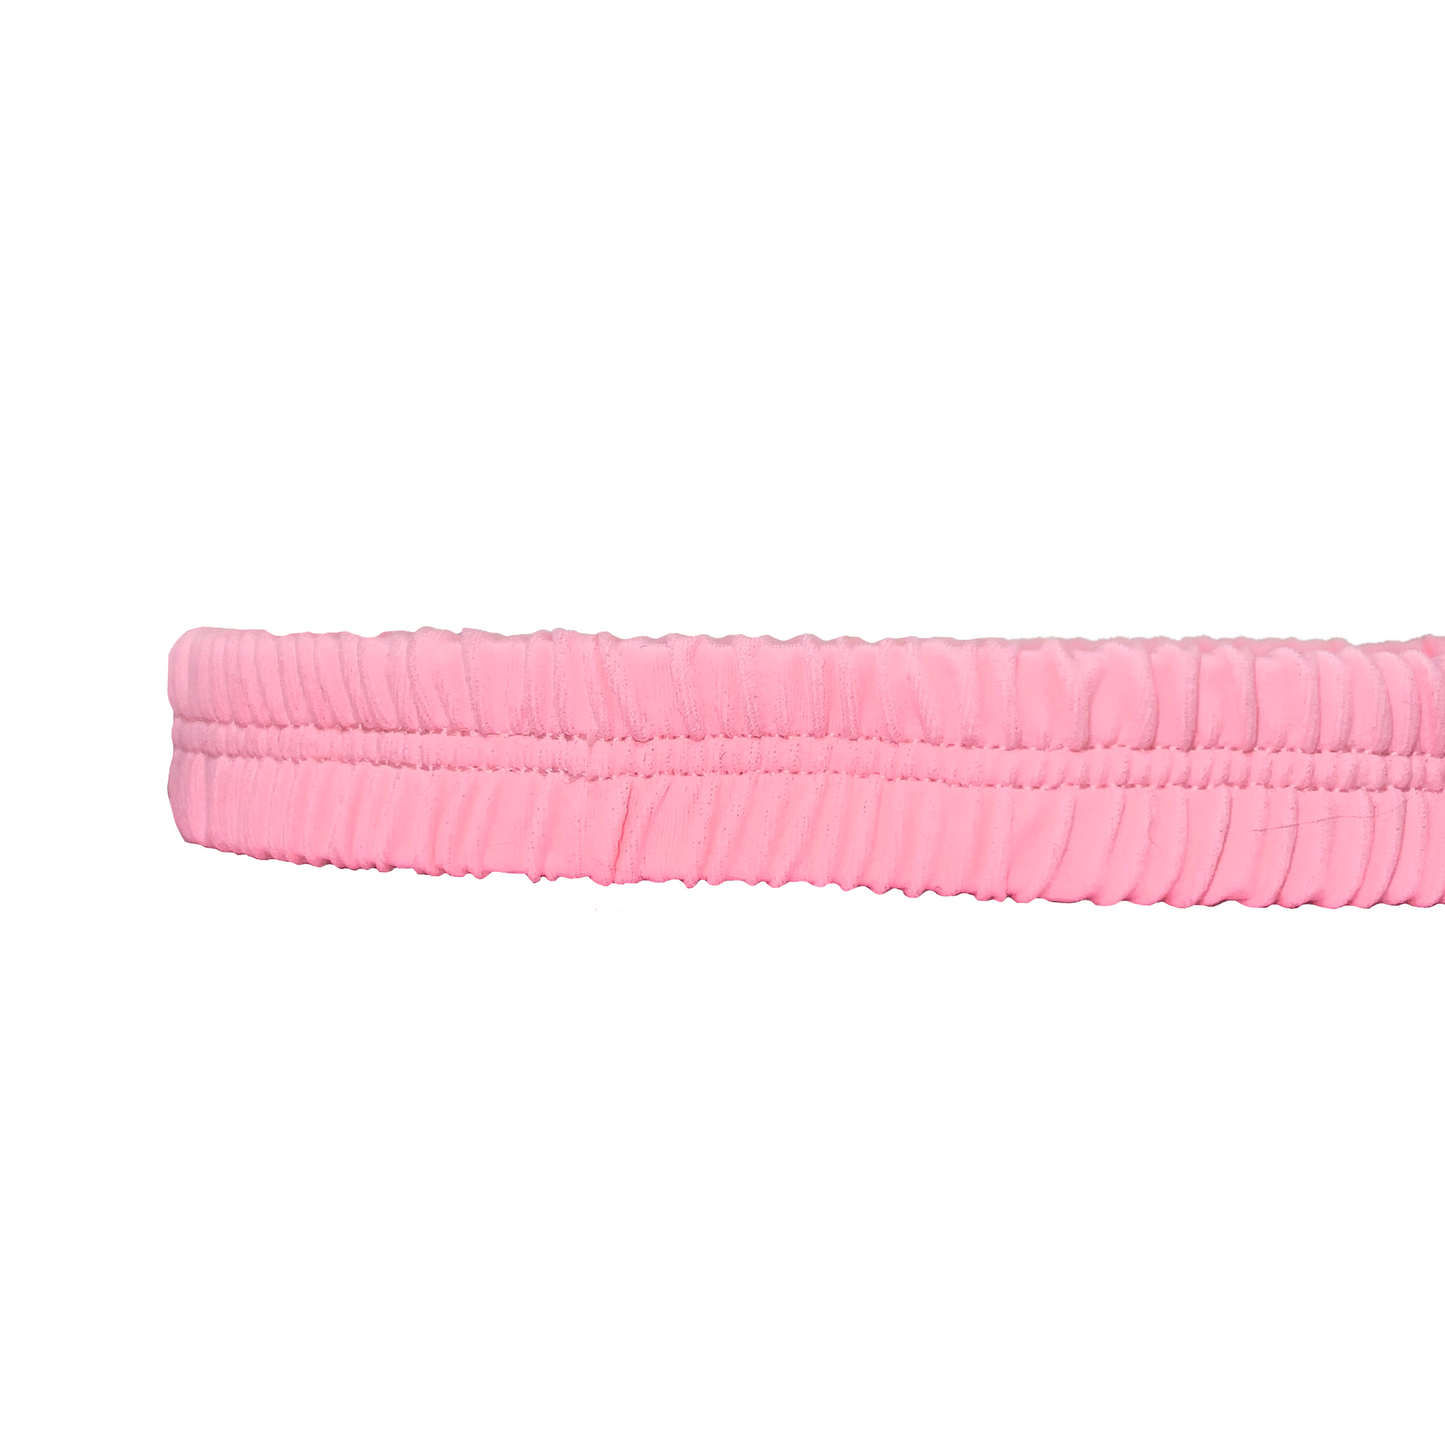 ACE Classic Garter: I'm Baby Pink